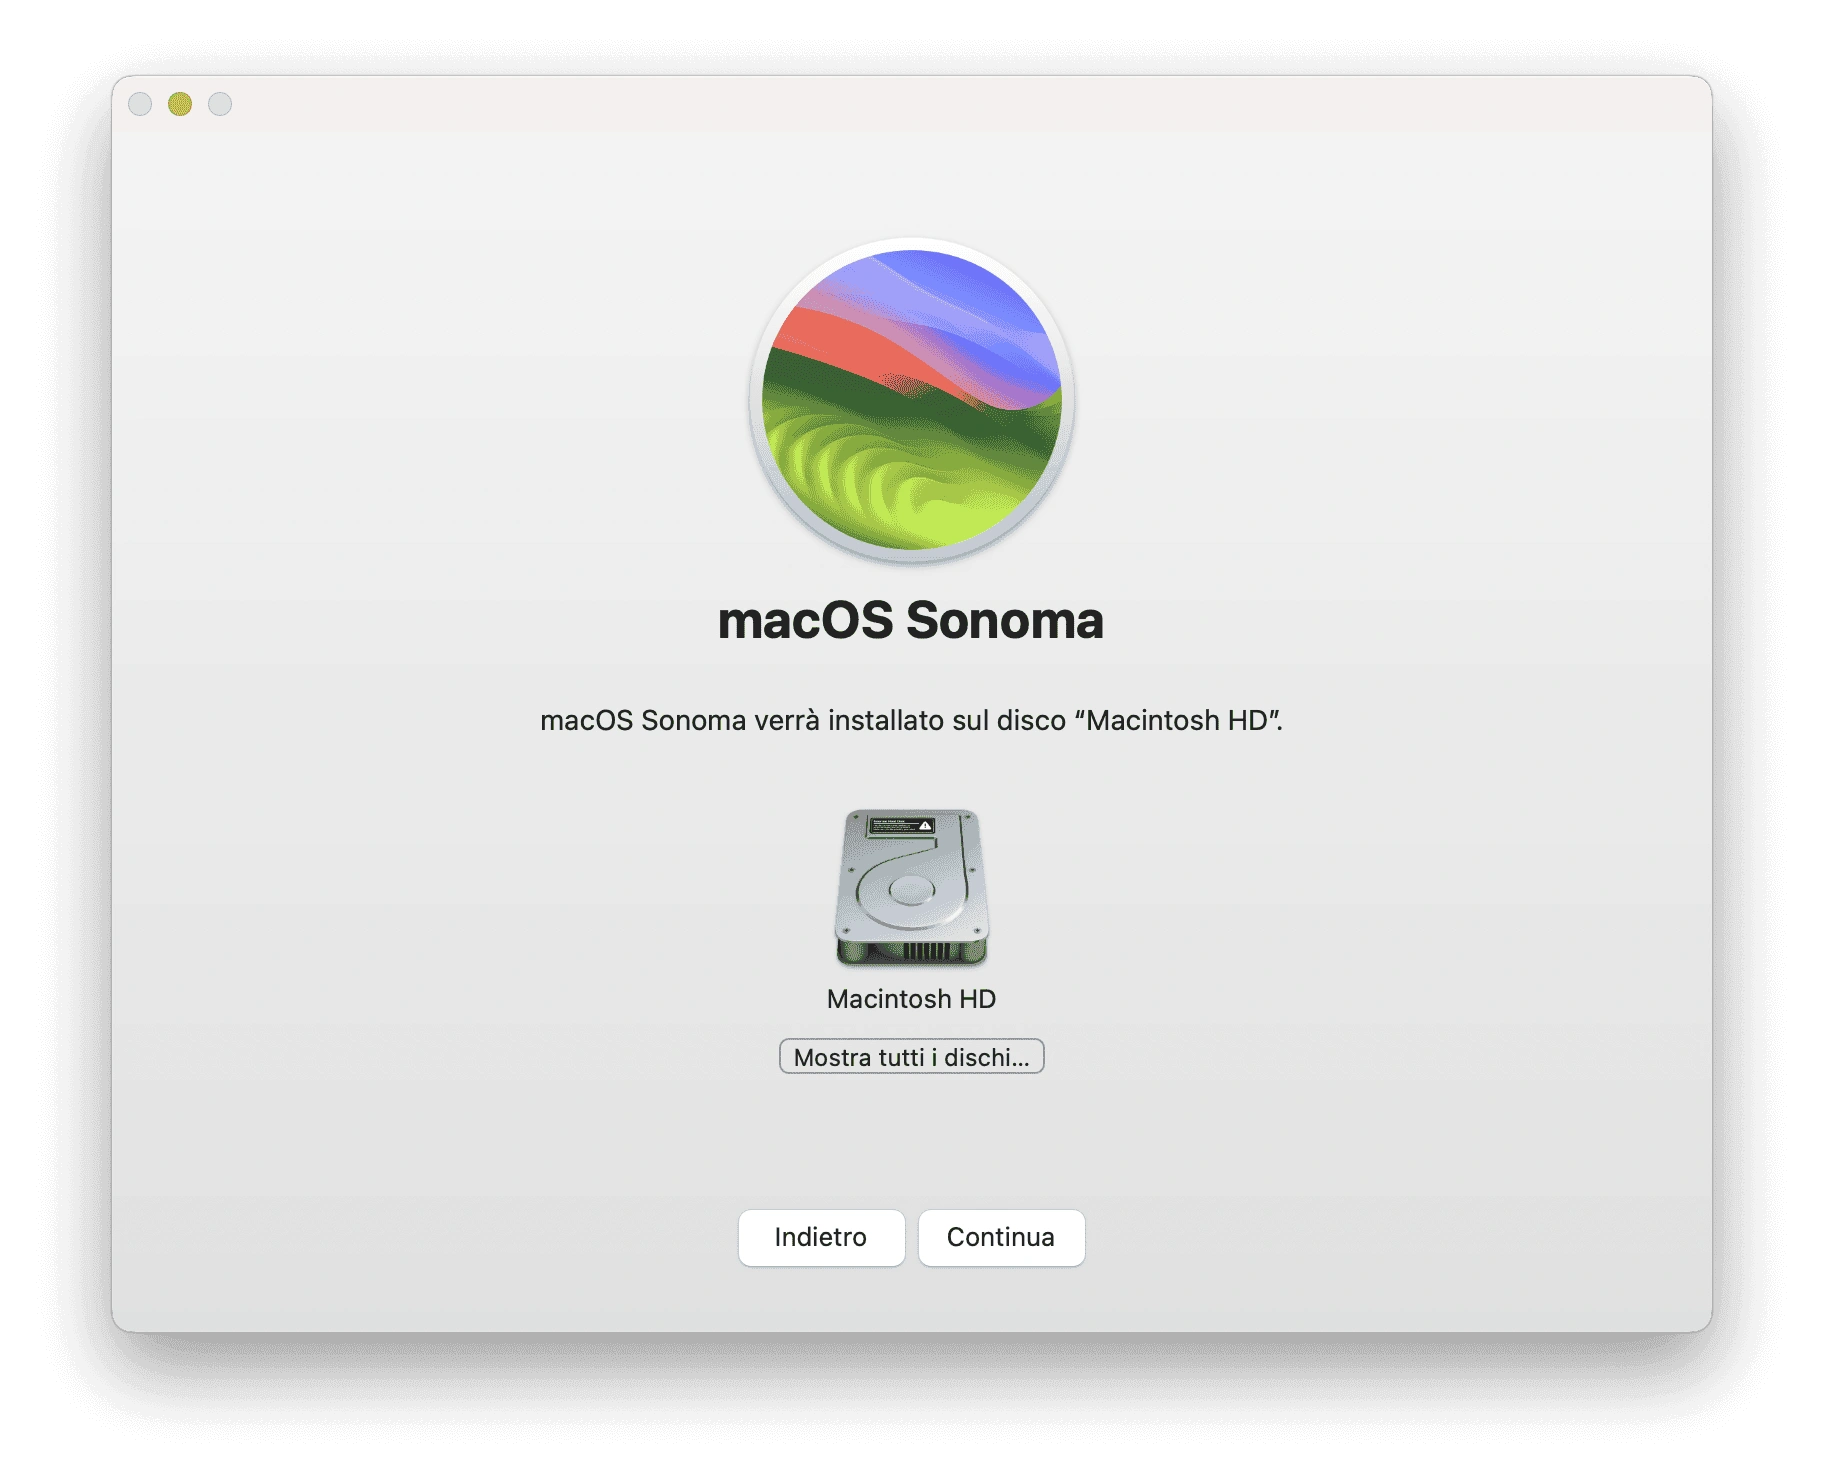 install-macos-sonoma-on-external-drive-it.png